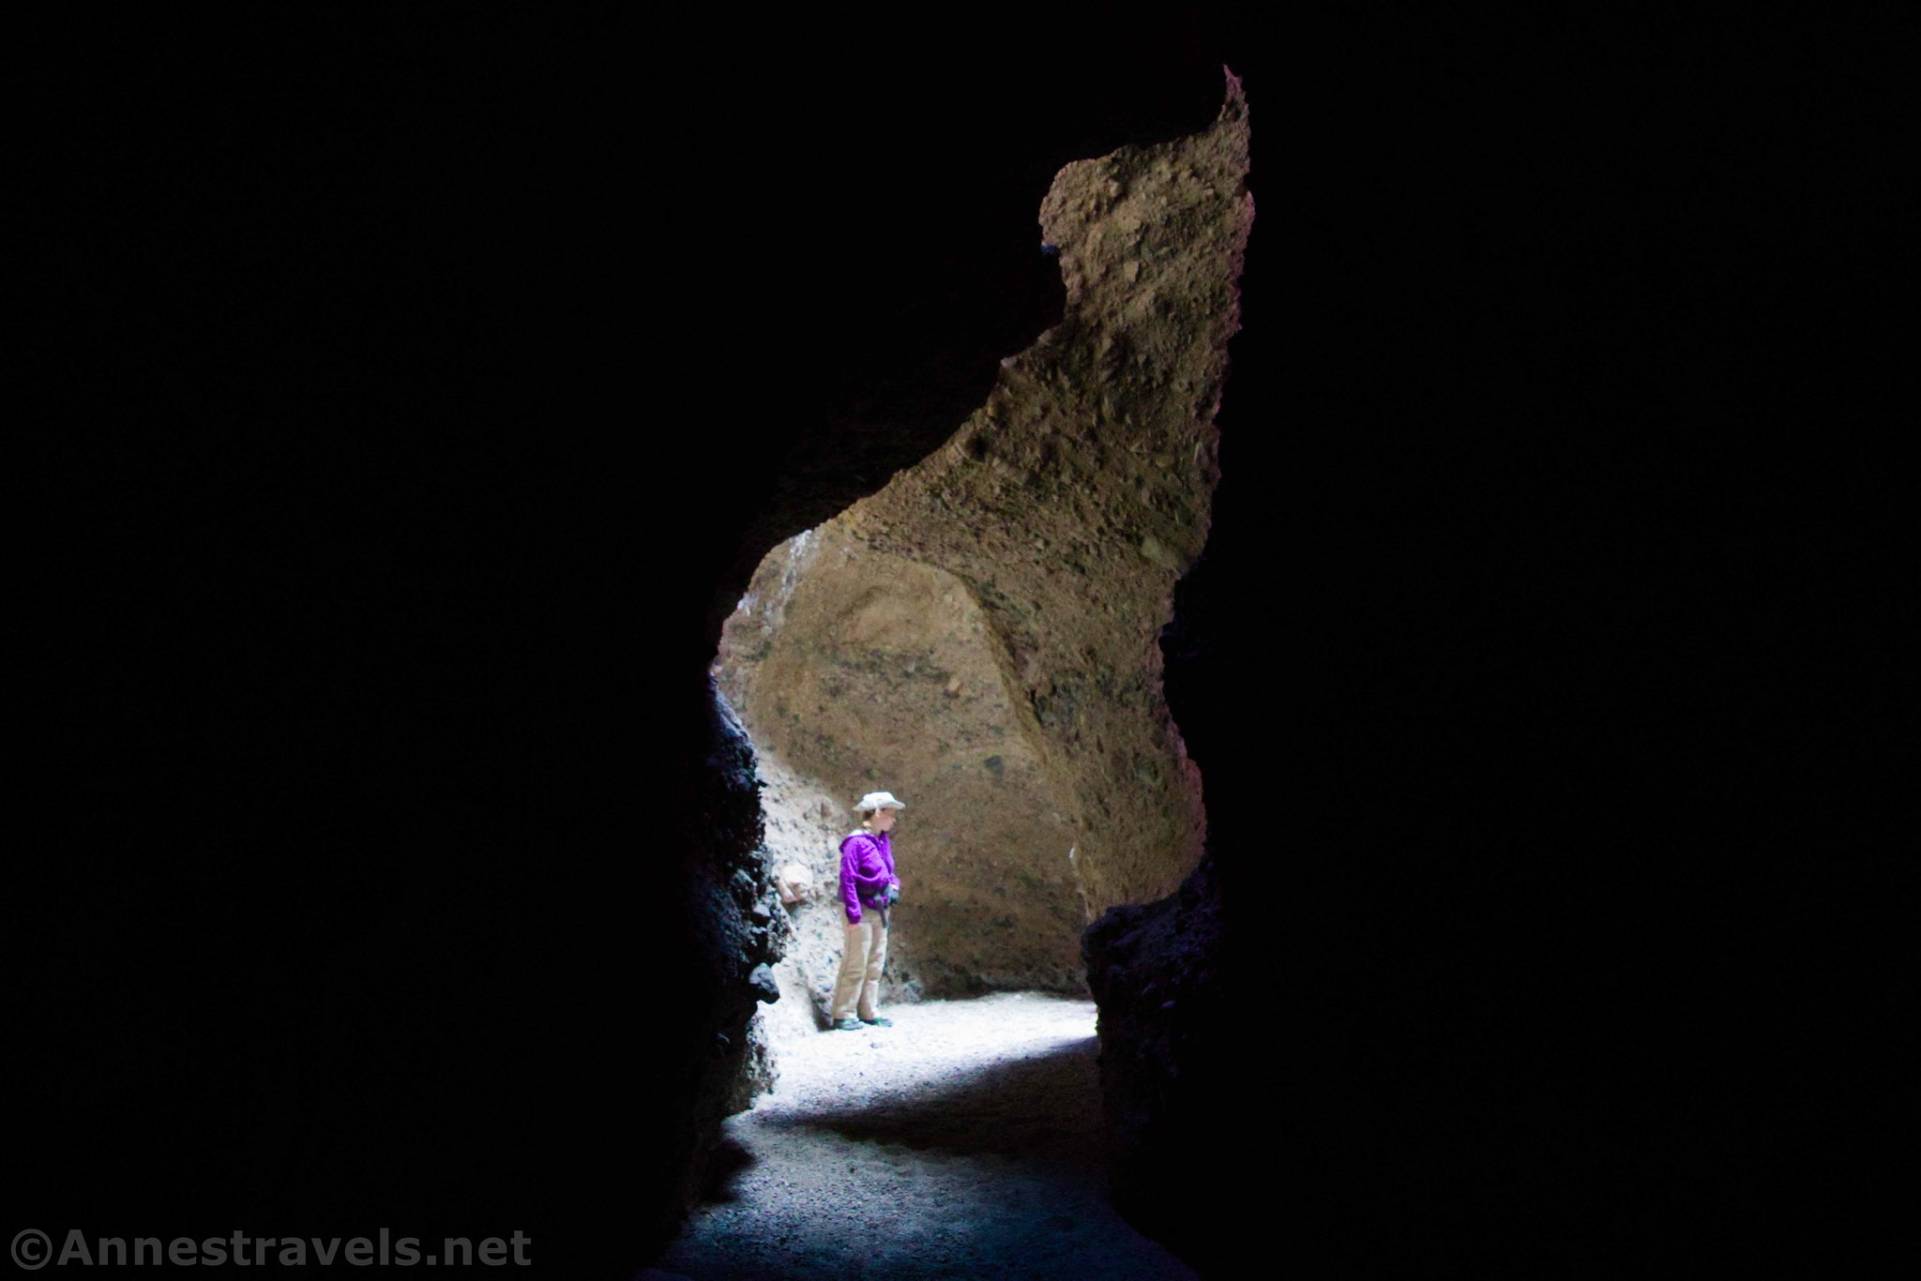 In a dark section of Sidewinder Canyon Slot 4, Death Valley National Park, California